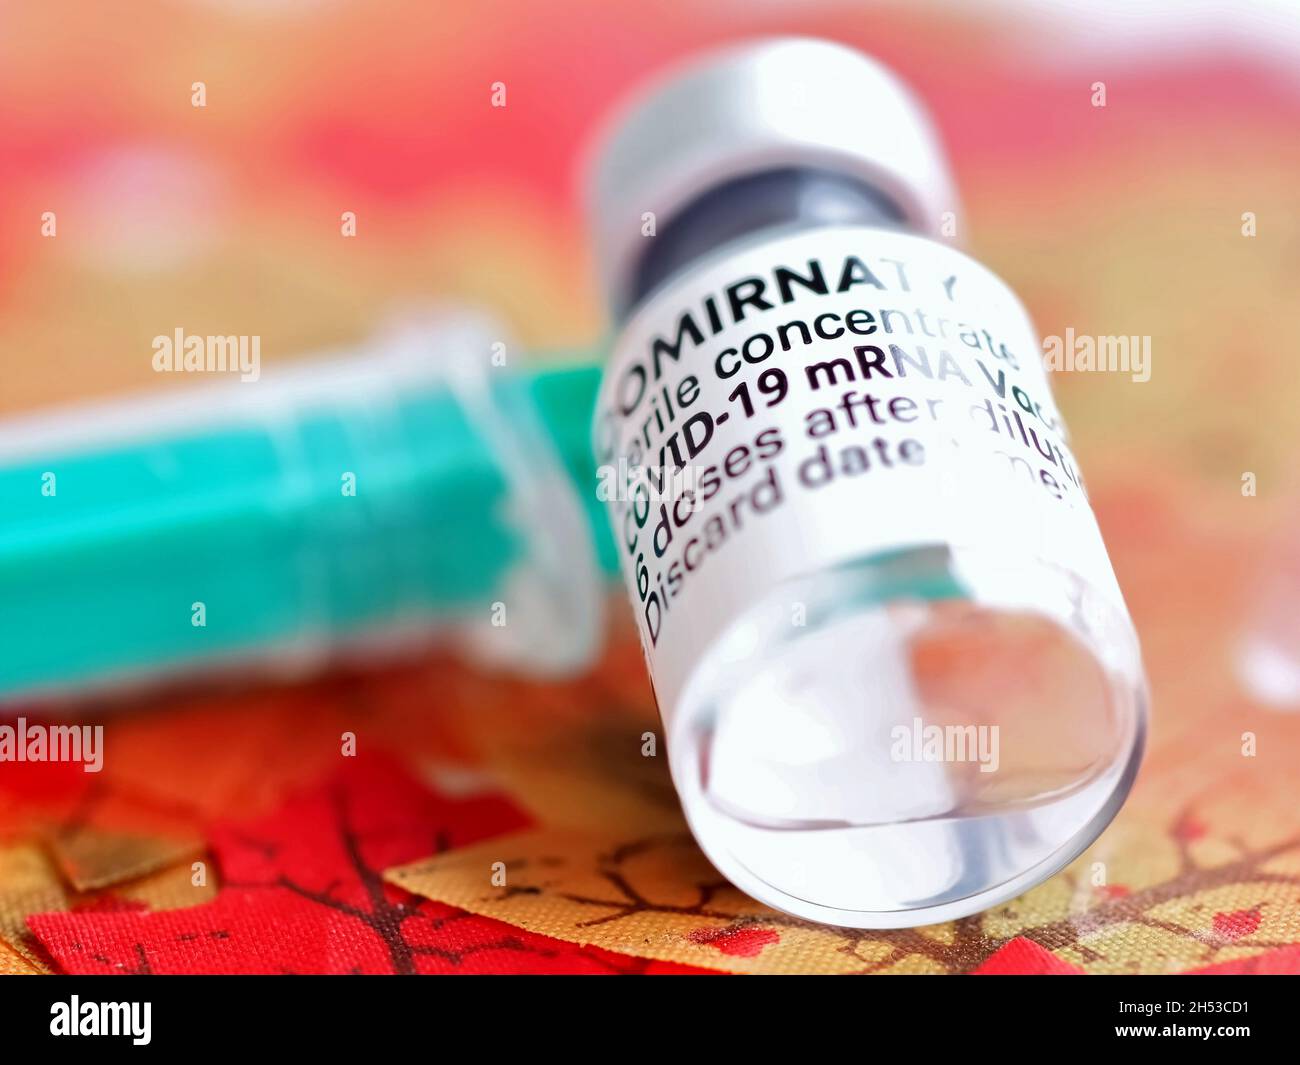 Comirrnaty Biontech Pfizer vaccination ampoule with a syringe against covid-19 or Corona virus on red leafs Stock Photo